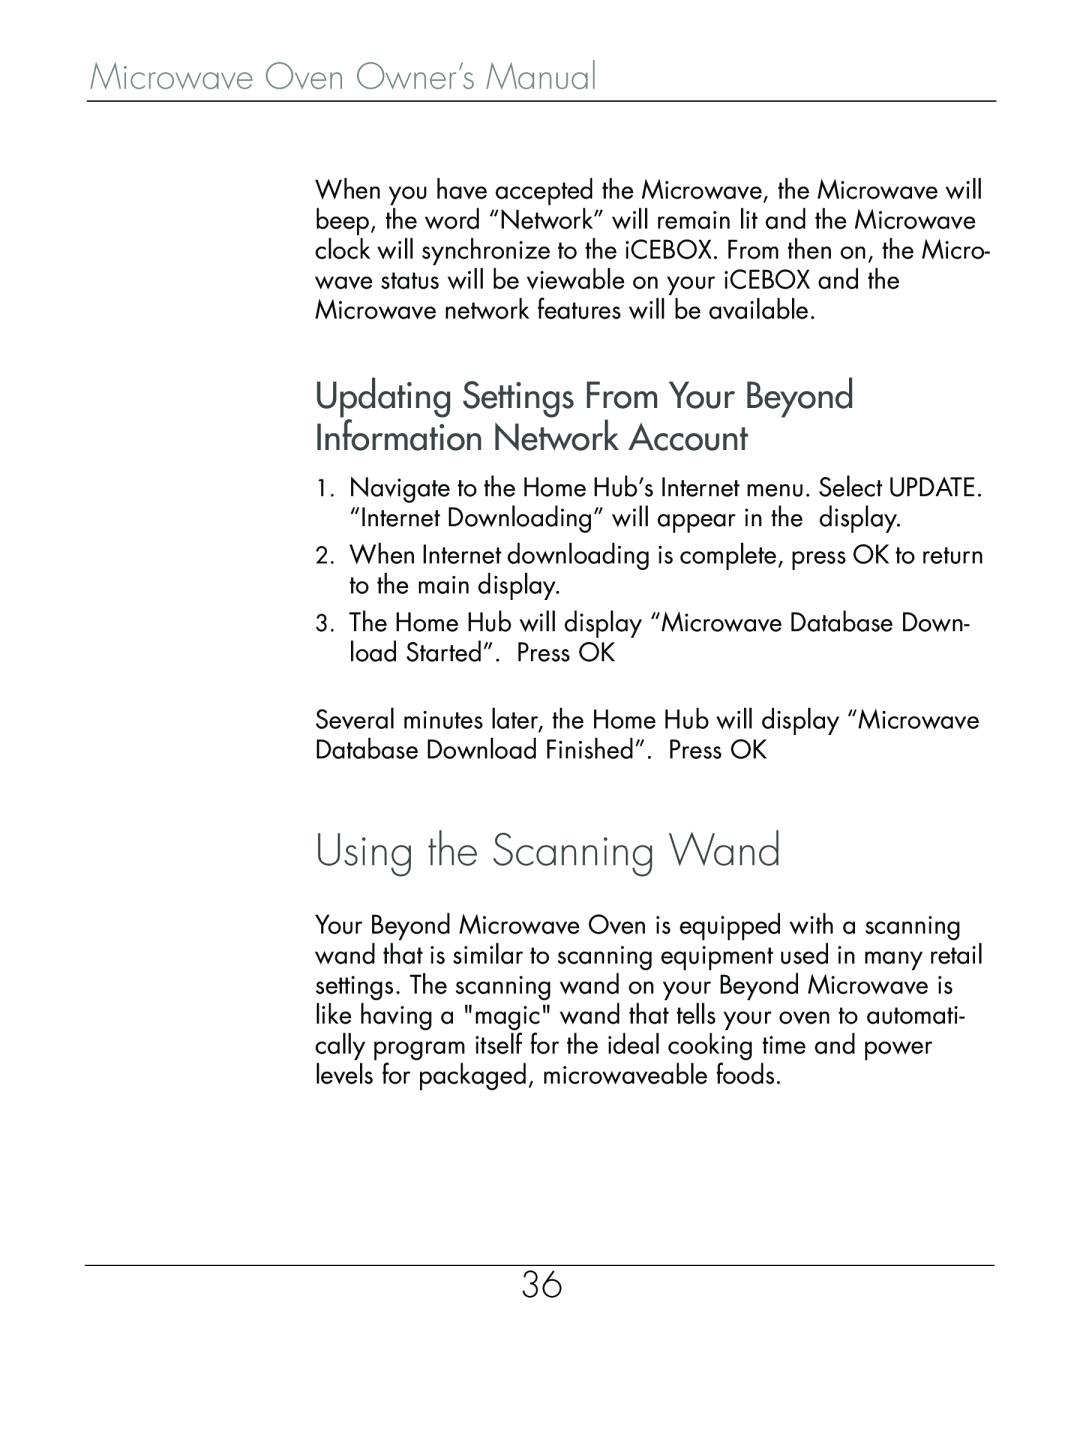 Beyond Microwace Oven manual Using the Scanning Wand, Updating Settings From Your Beyond Information Network Account 